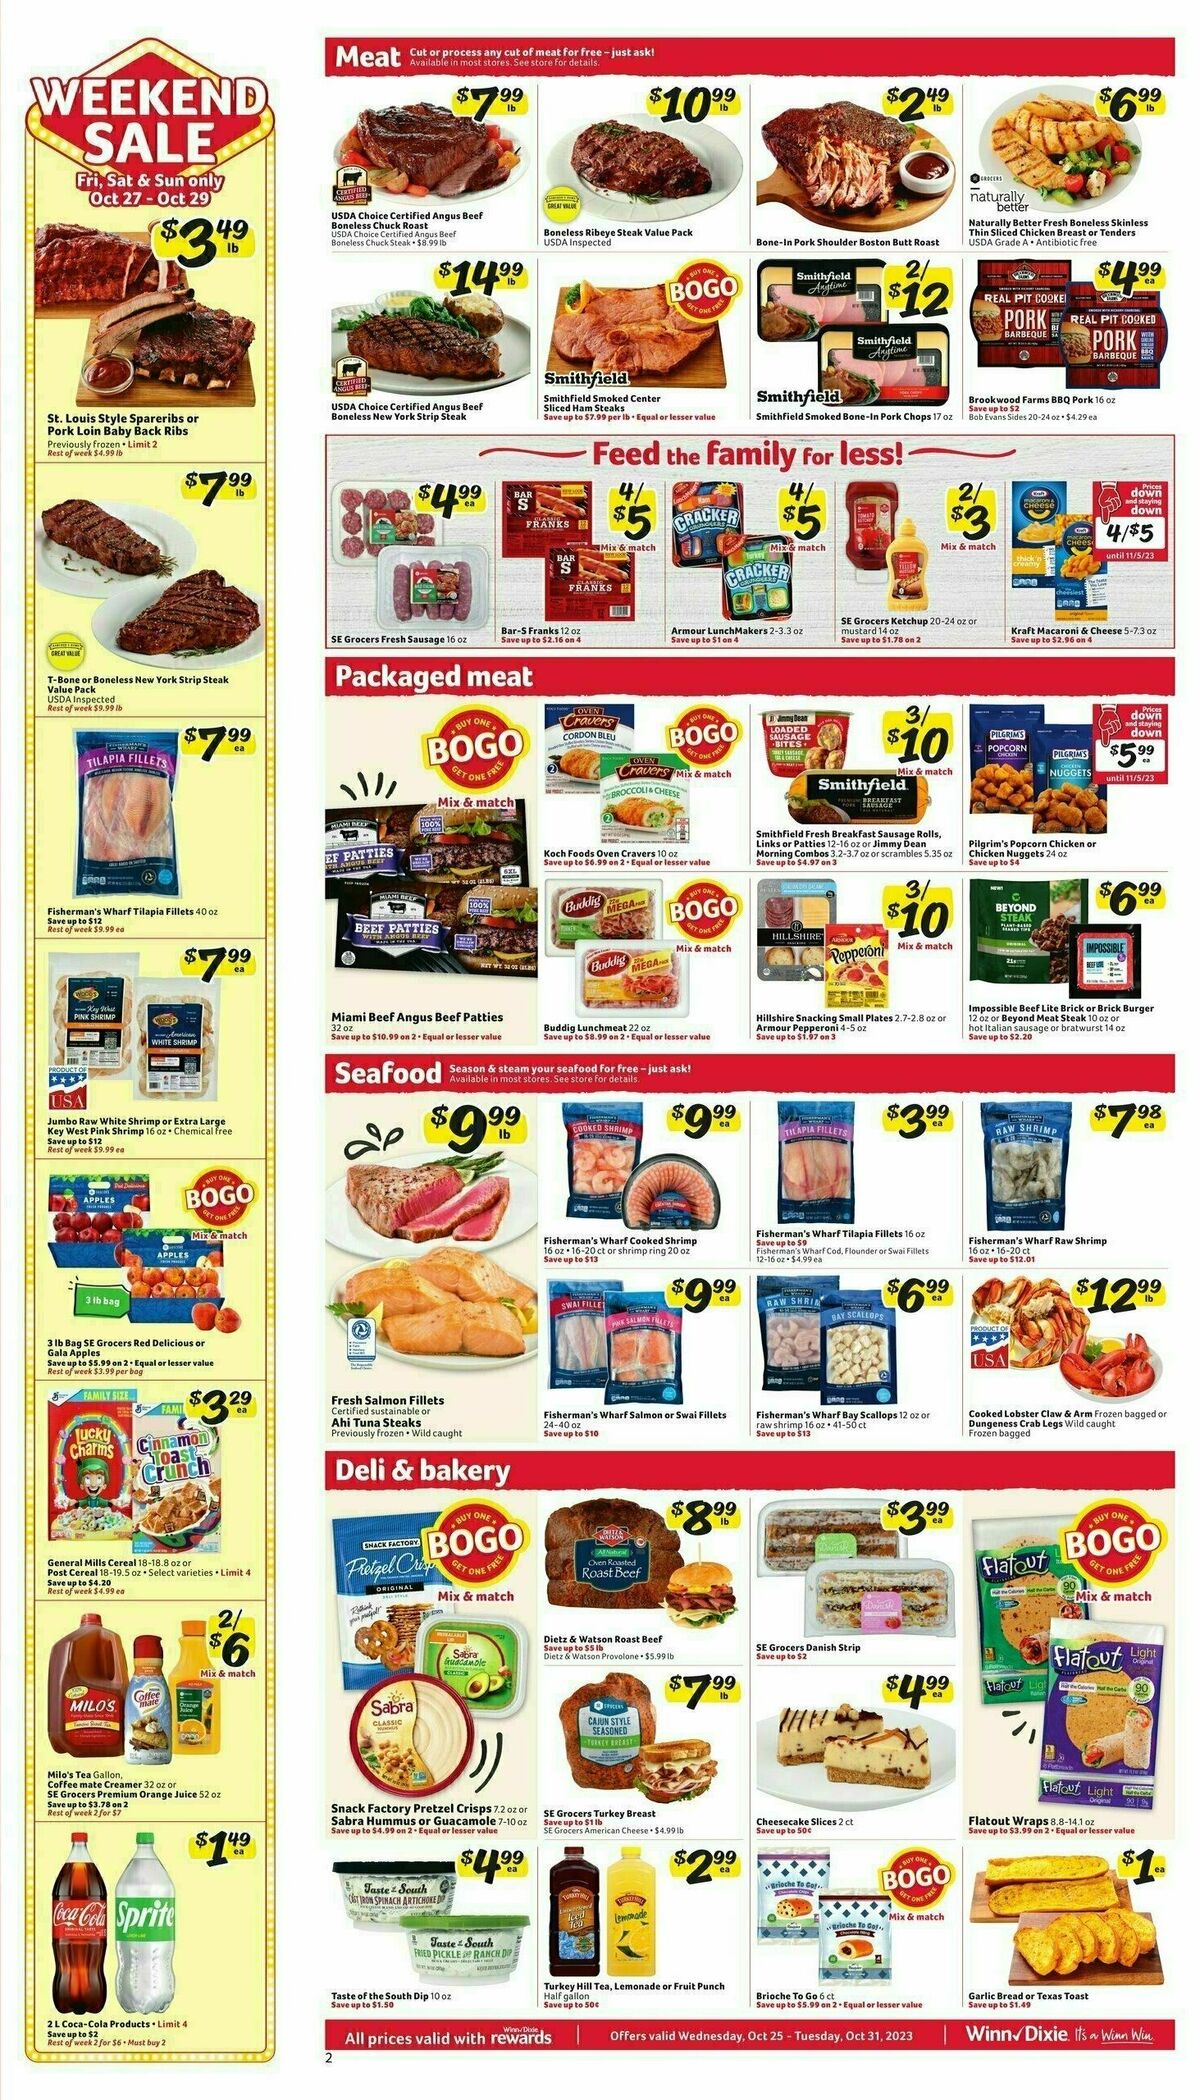 Winn-Dixie Weekly Ad from October 25